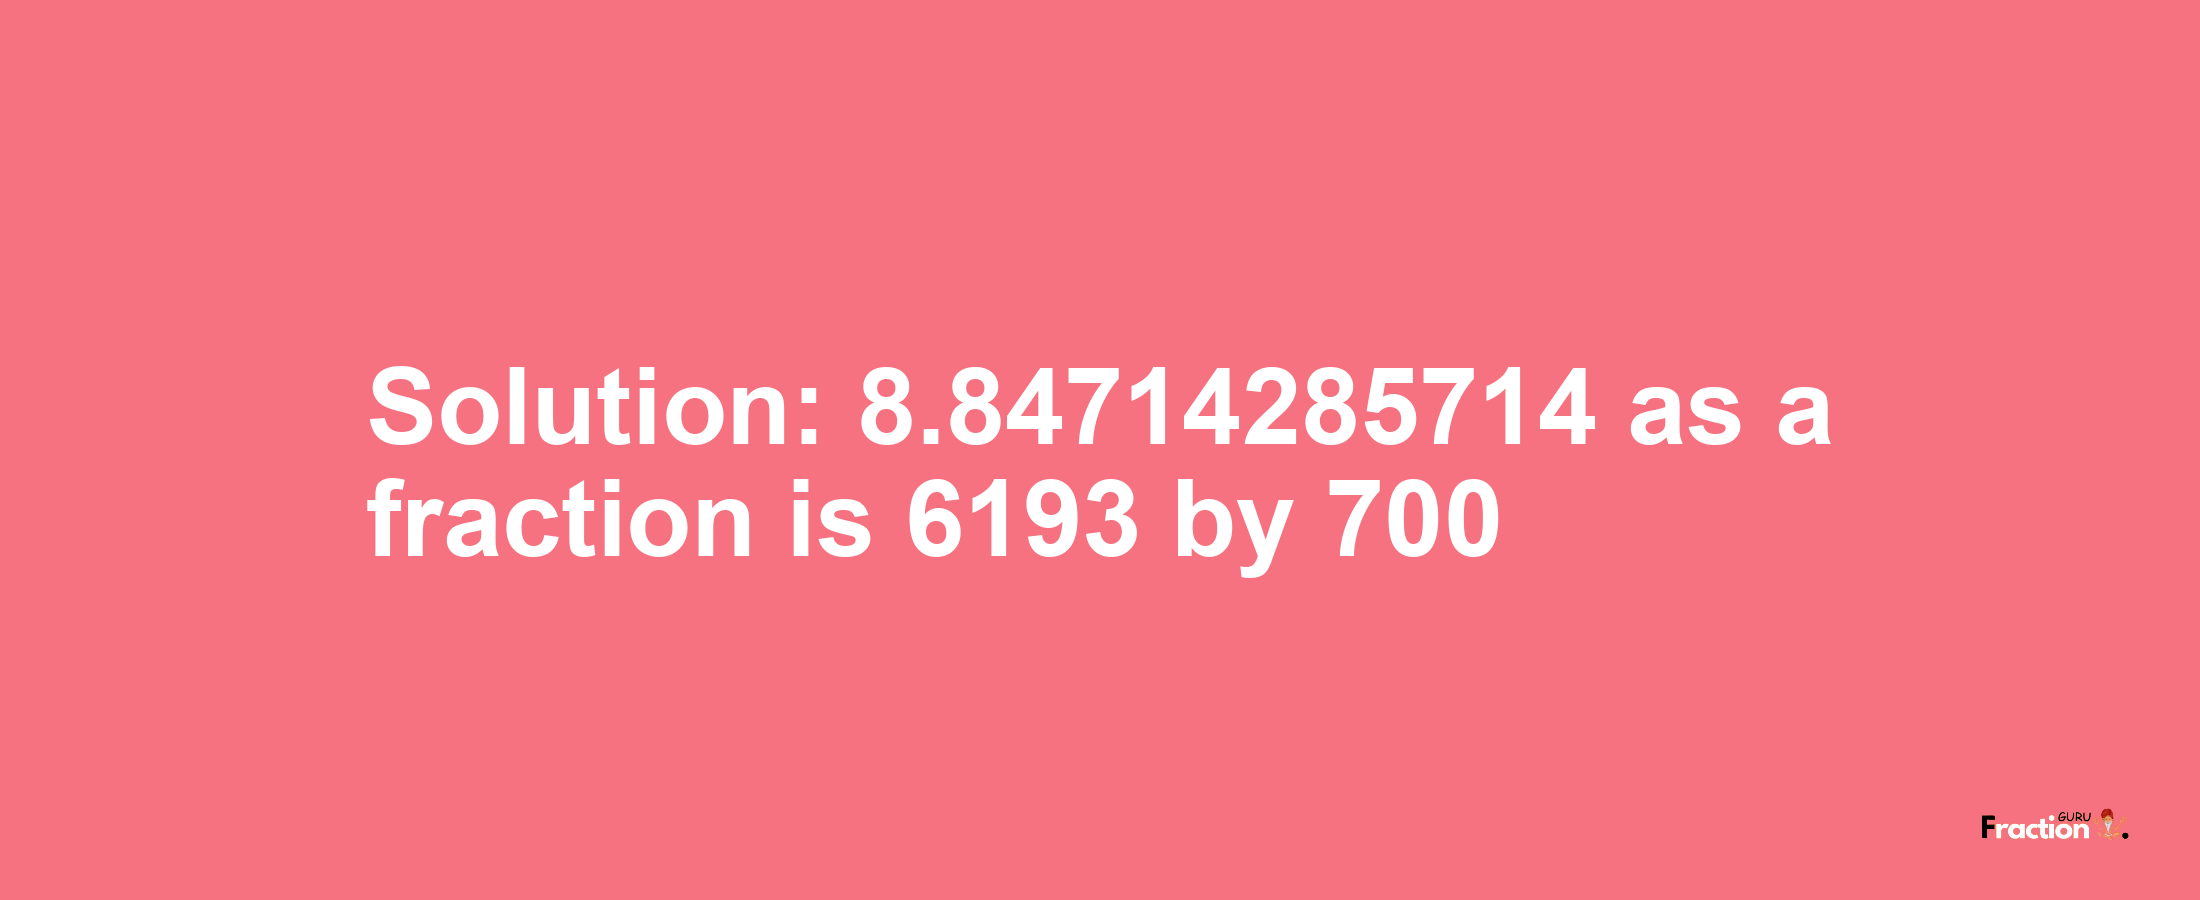 Solution:8.84714285714 as a fraction is 6193/700